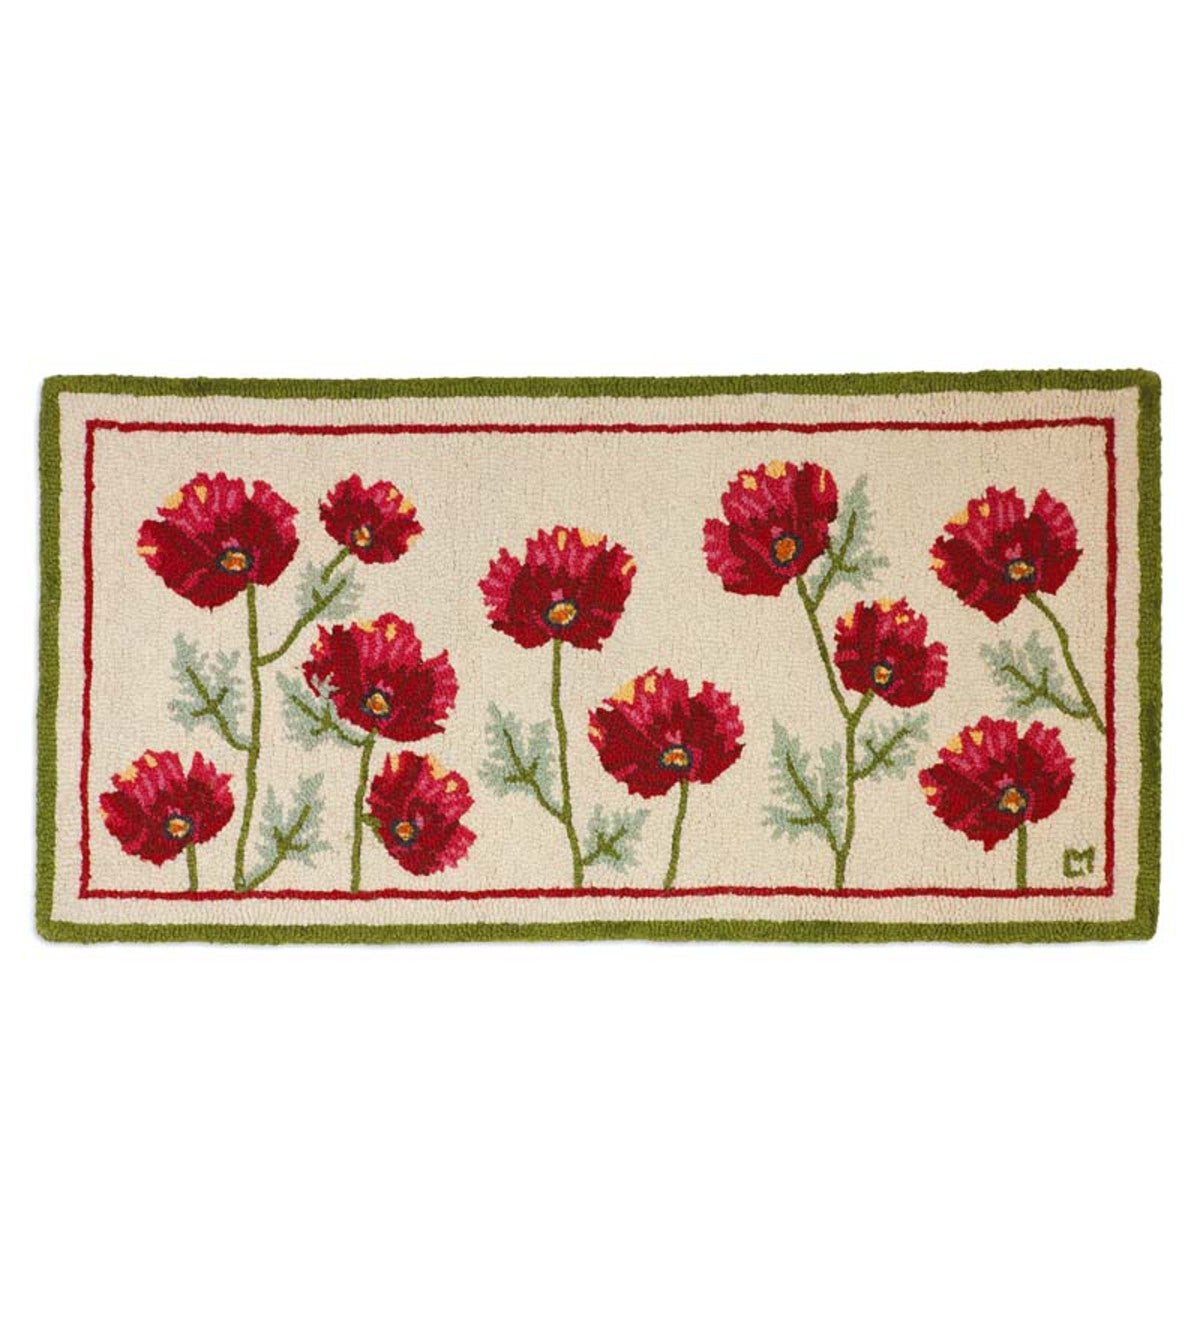 Hand-Hooked Wool Poppy Profusion Hearth Rug